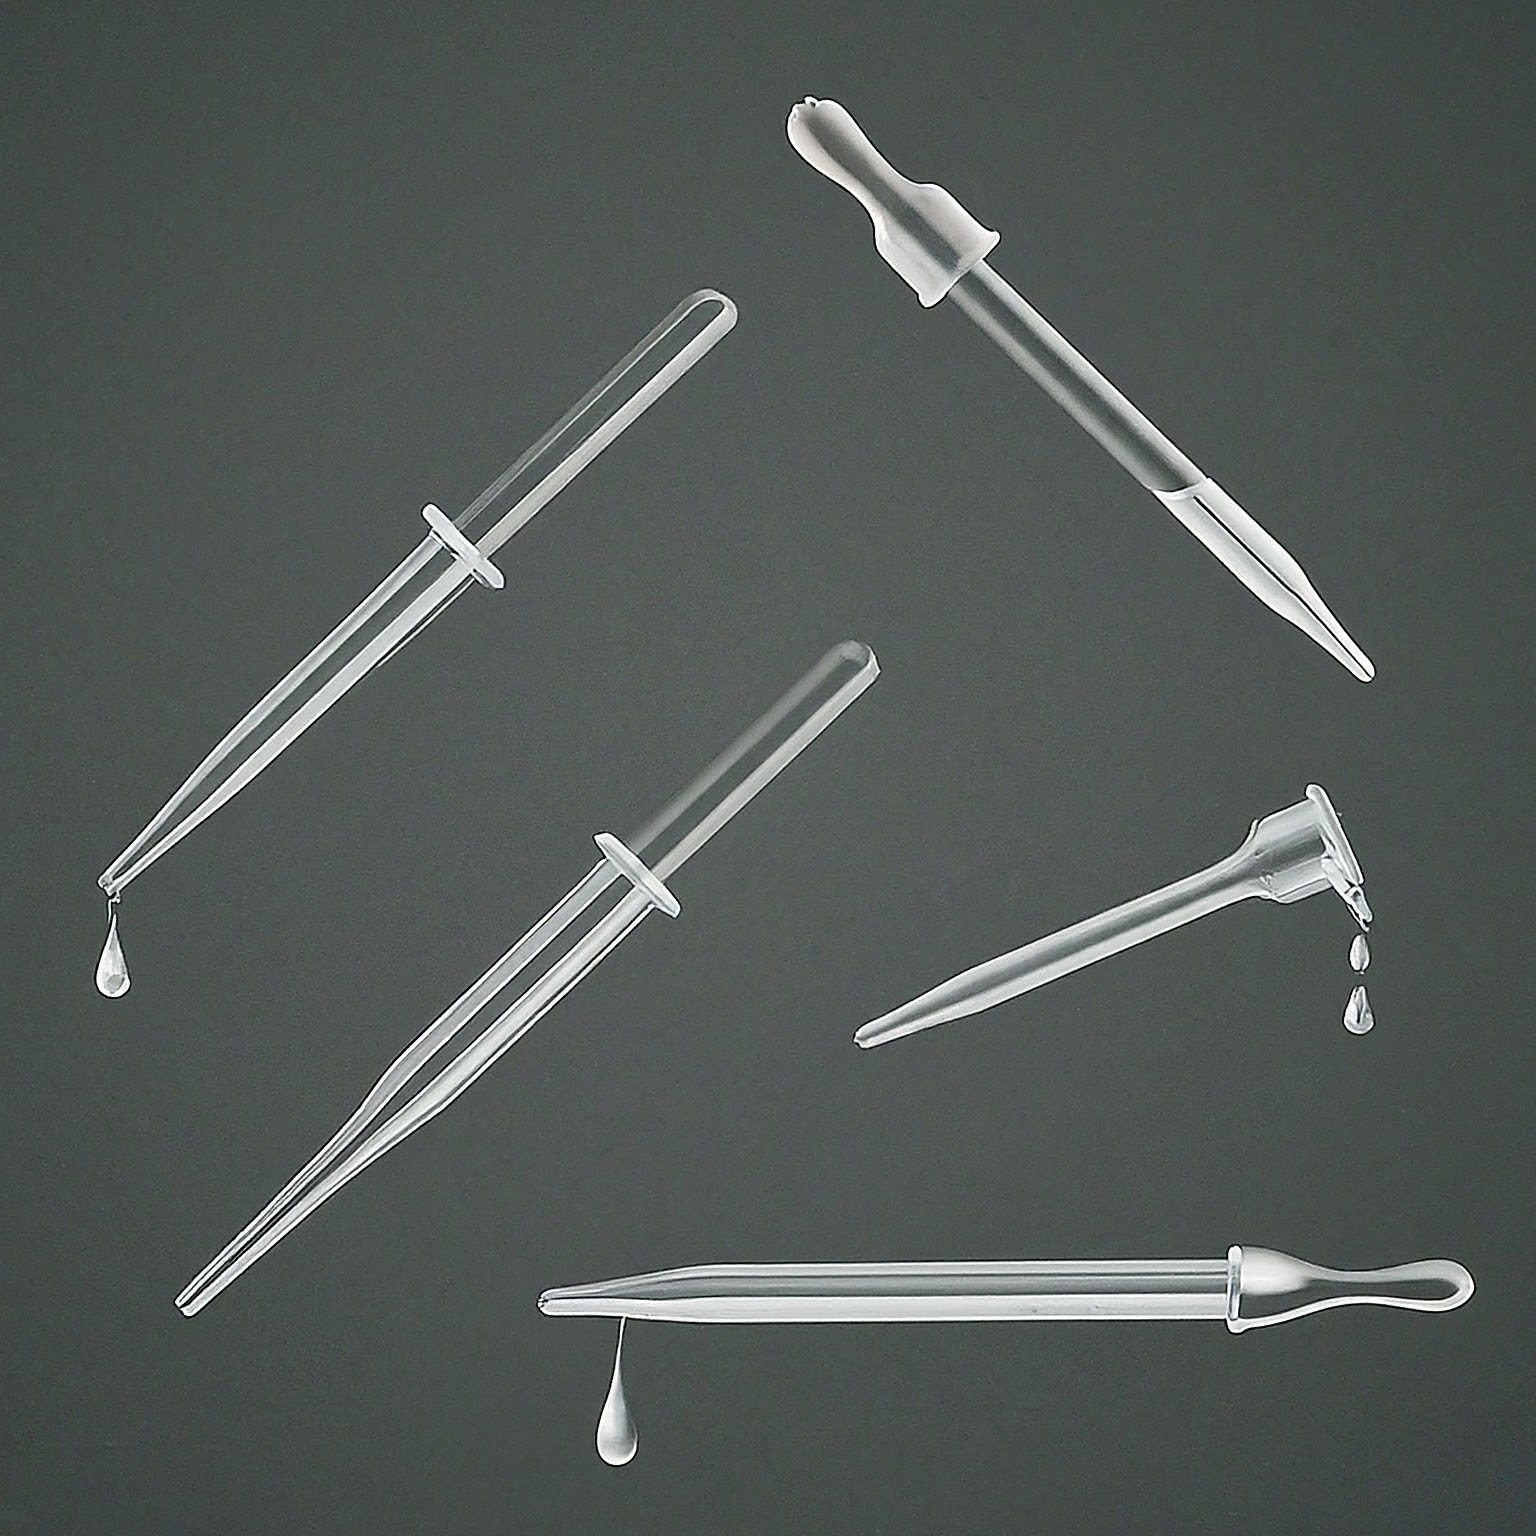 Illustration of different types of glass and plastic pipettes